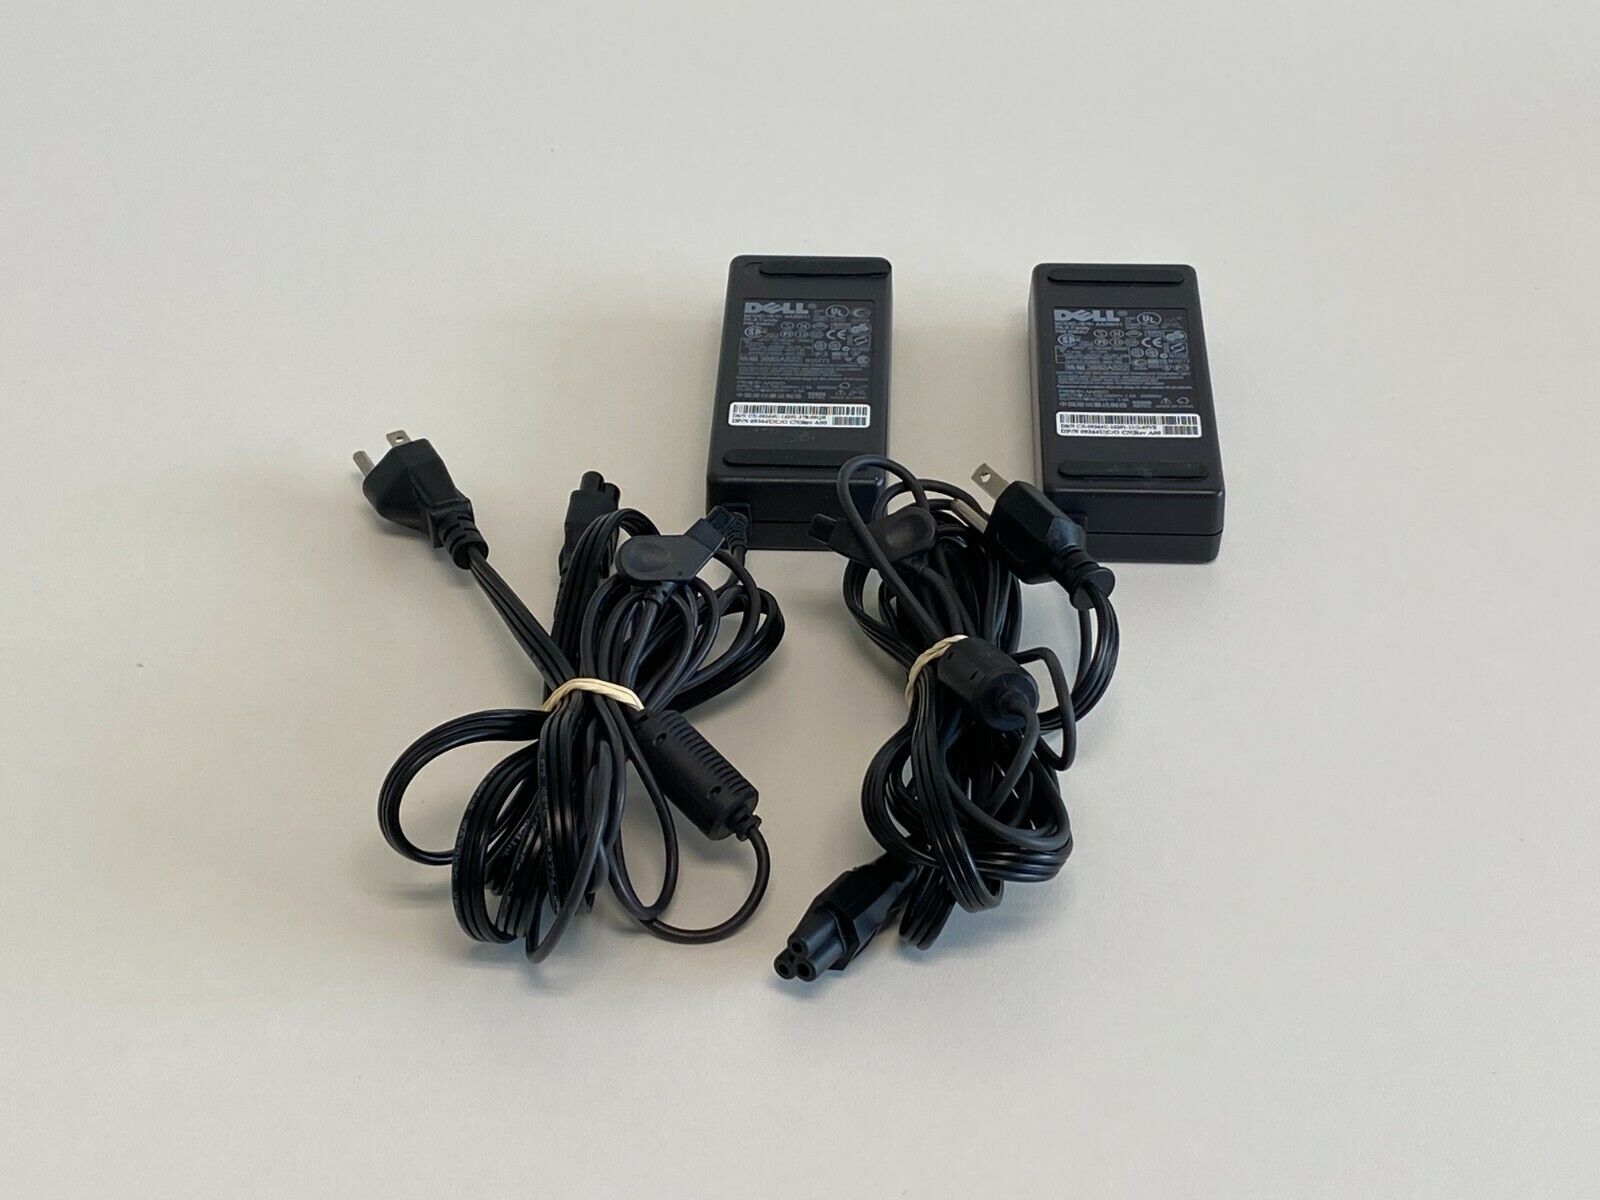 BB25:  Lot of 2 Genuine Dell AA20031 Power Supply Adapter